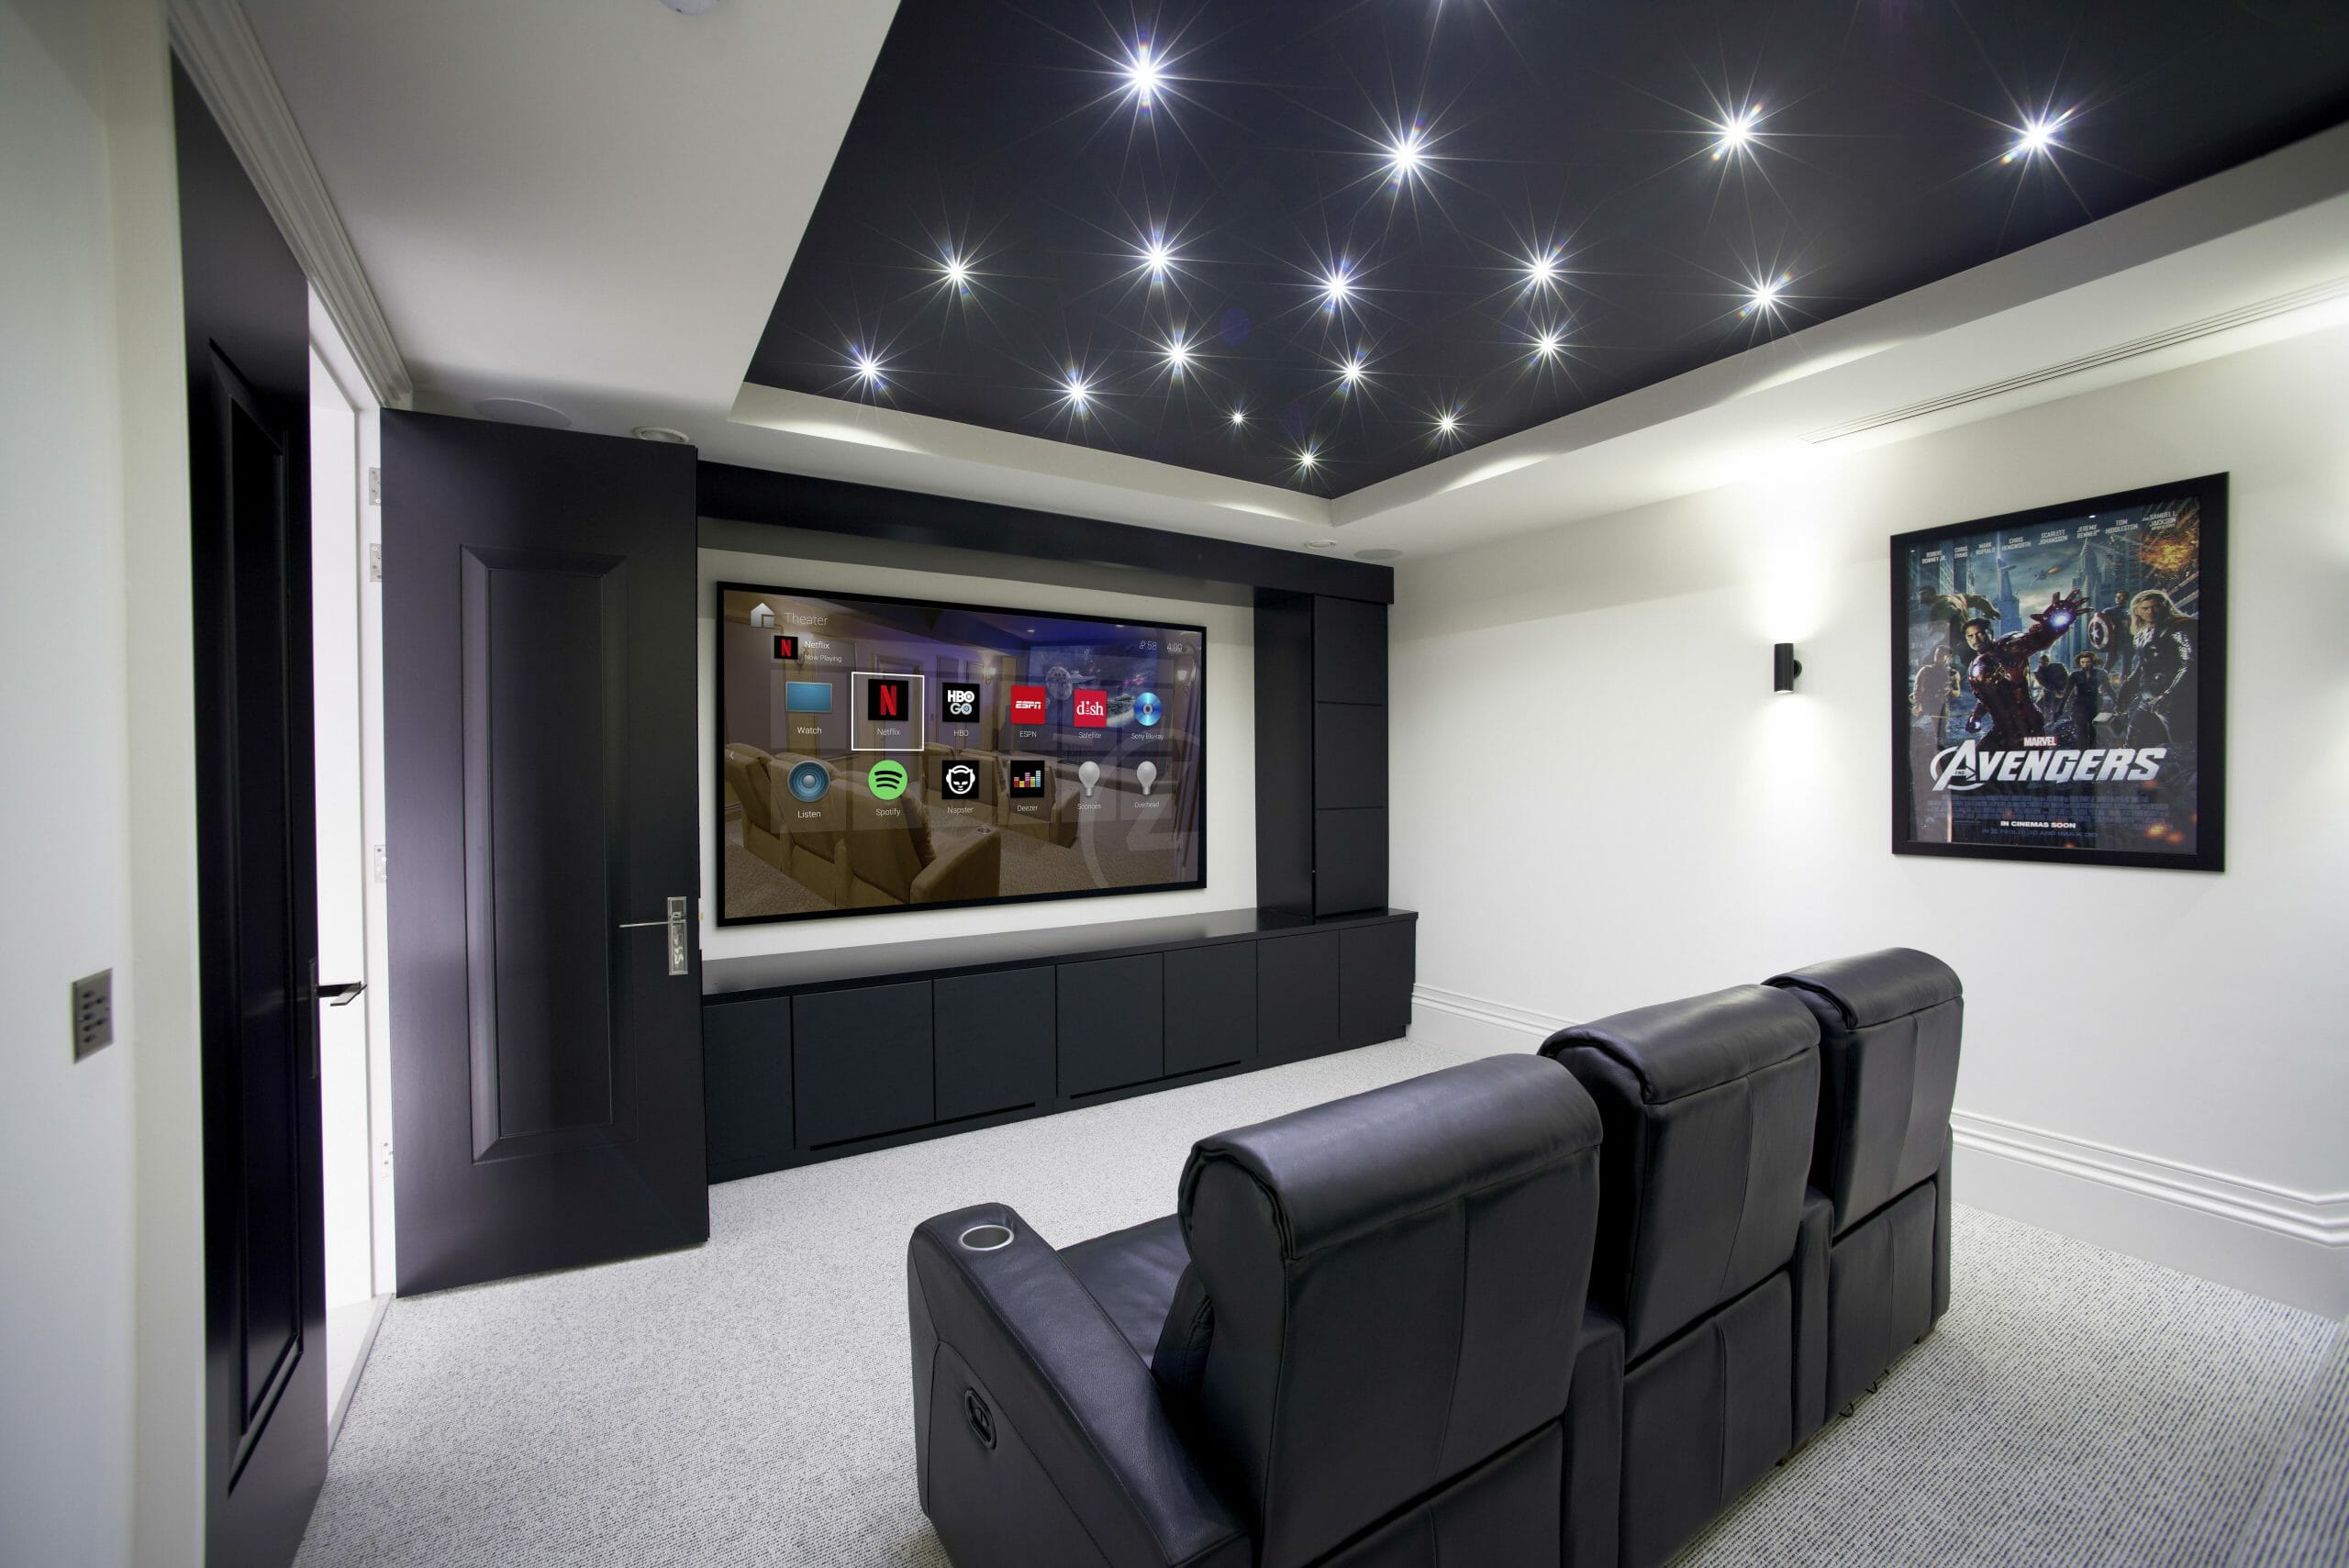 Choosing the Right Smart Home Automation System for your Home